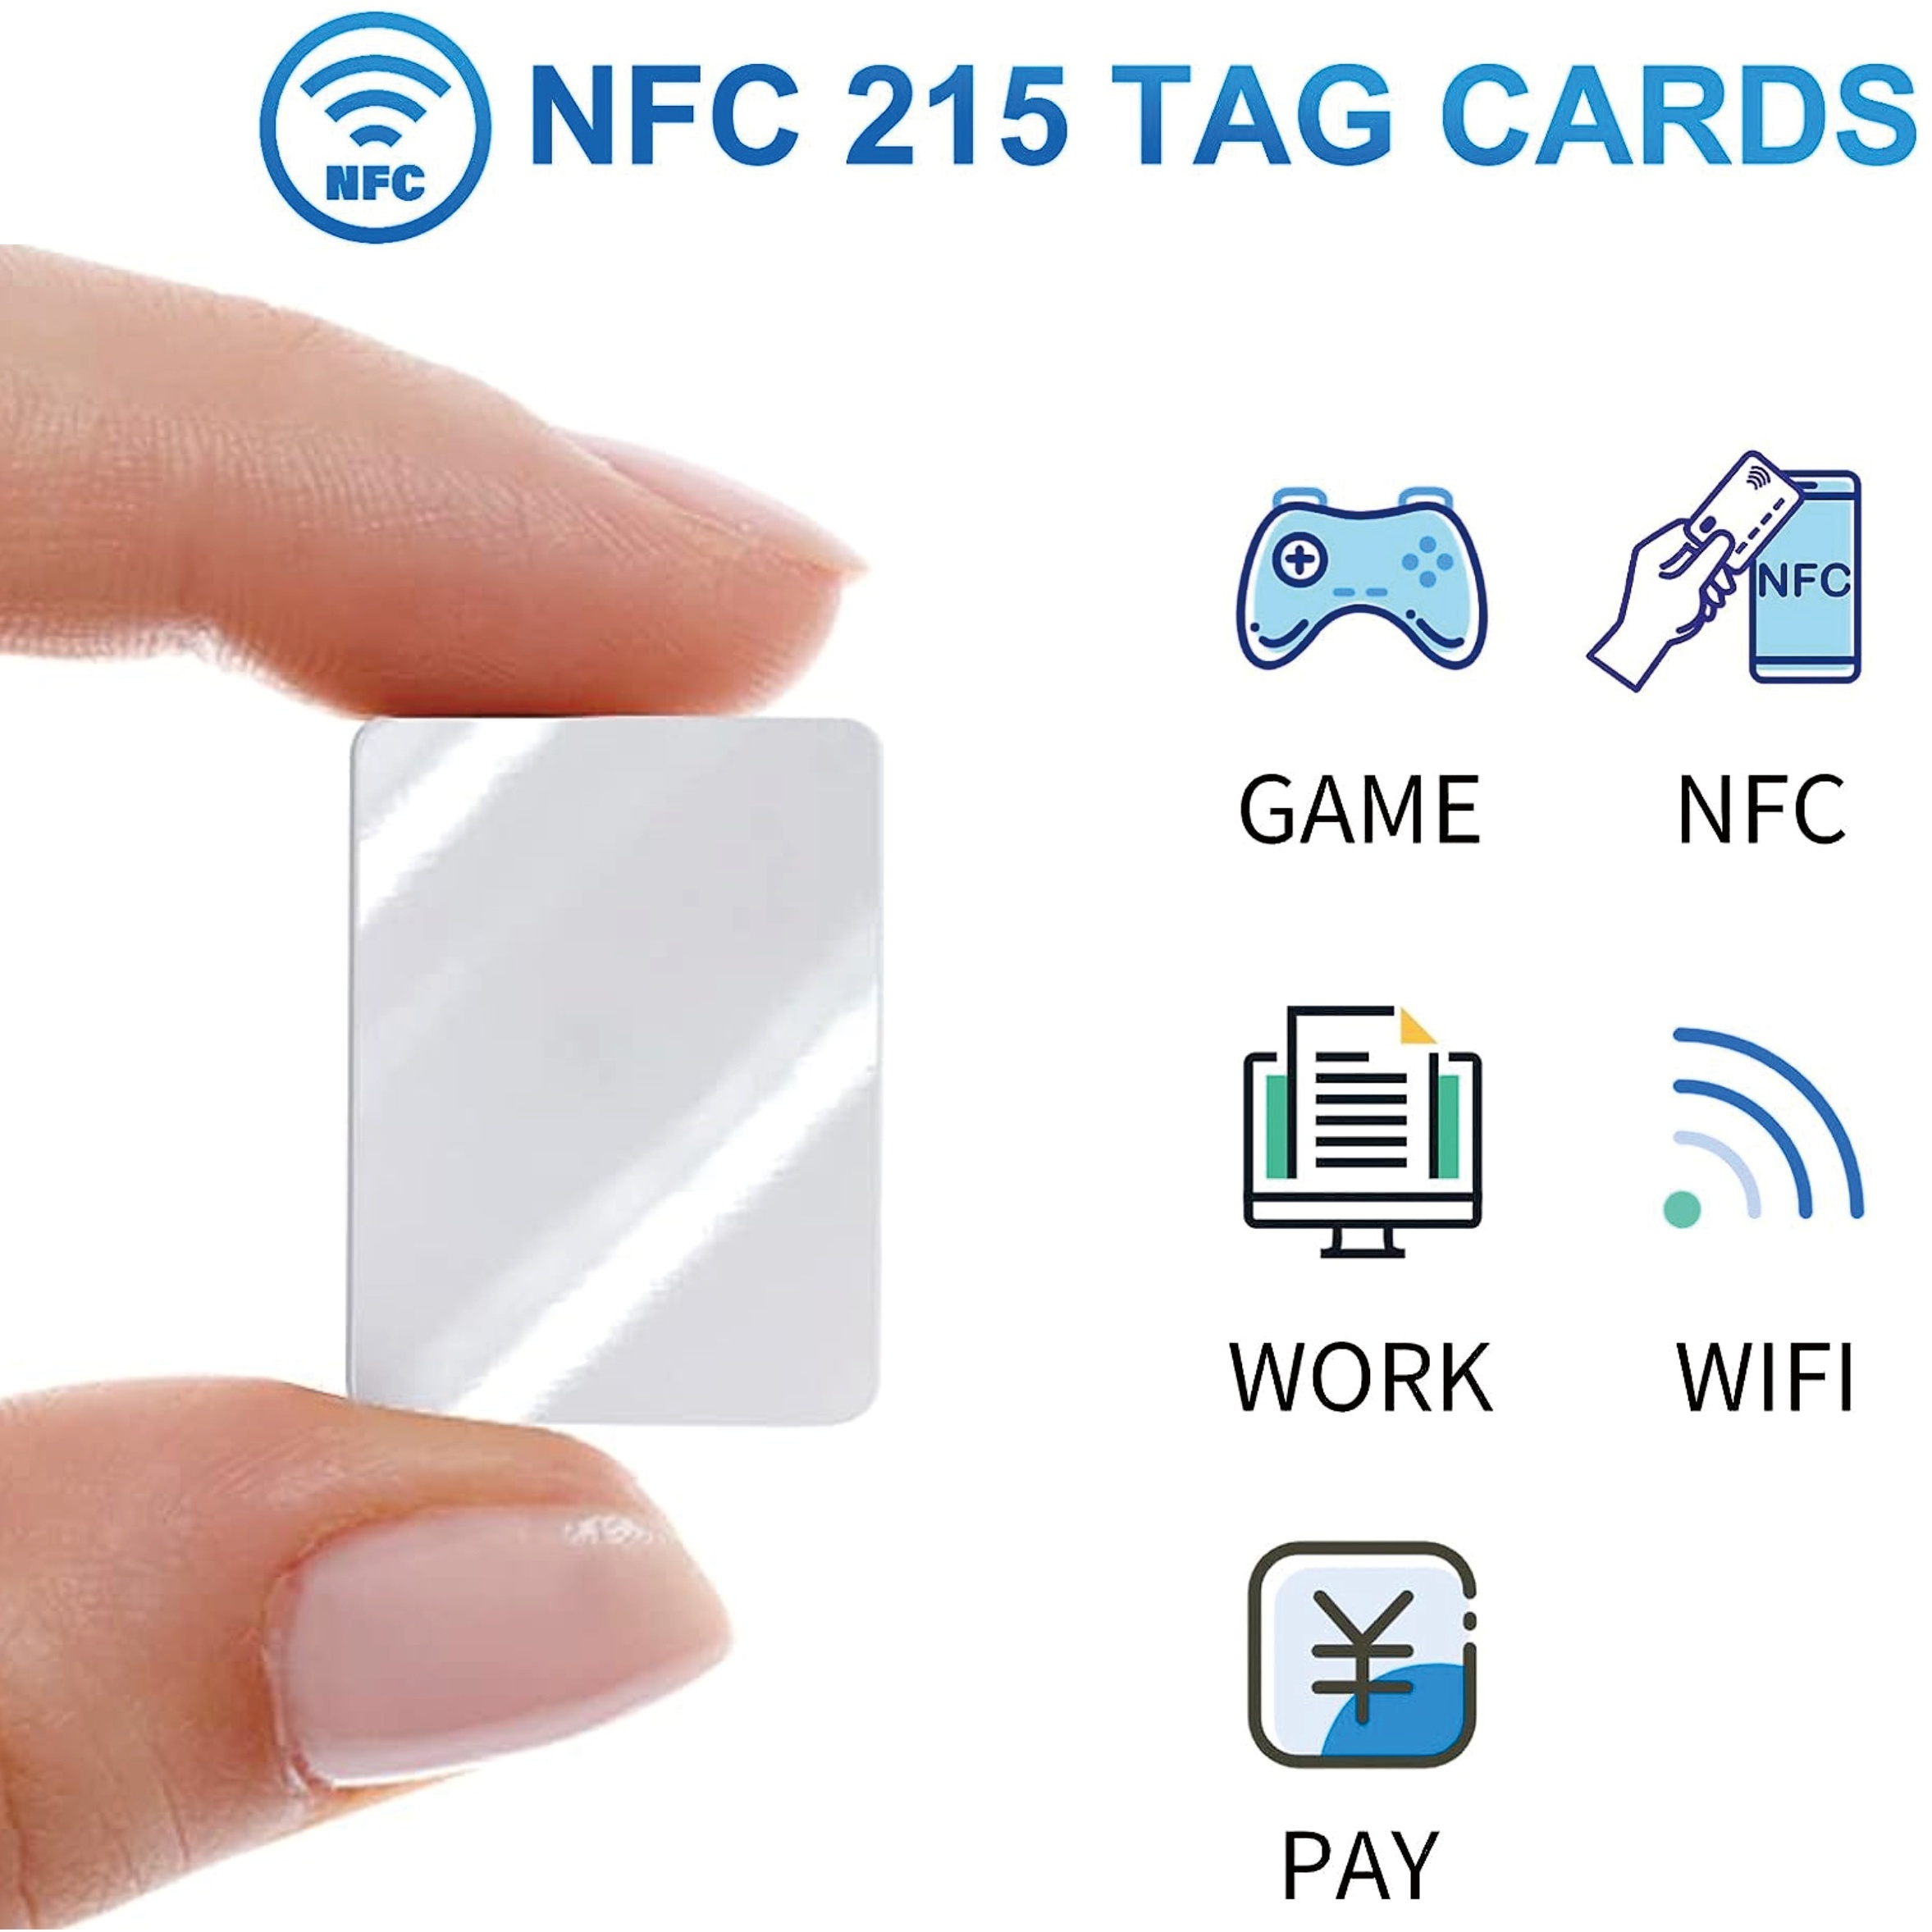 50pcs NFC Cards NFC Tags Ntag215 NFC chip NFC 215 tag rewritable NFC Coin  Cards，RFID Stickers Compatible with Tagmo and NFC Enabled Mobile Phones and